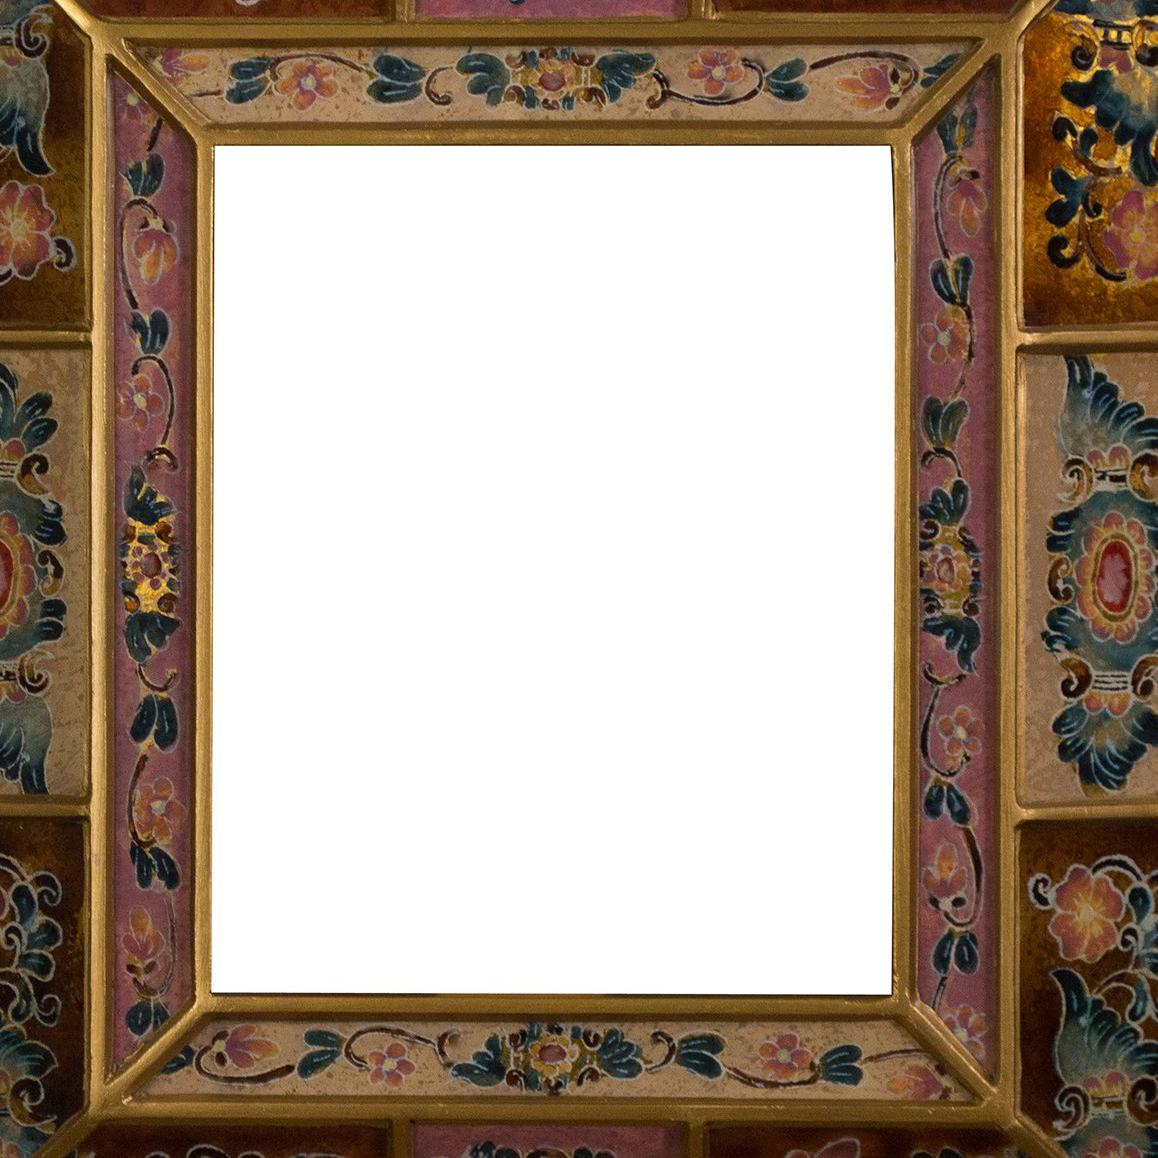 This glass frame, now being used to hold a mirror, was hand-painted by an unknown Peruvian artist. The opening of the frame is 8